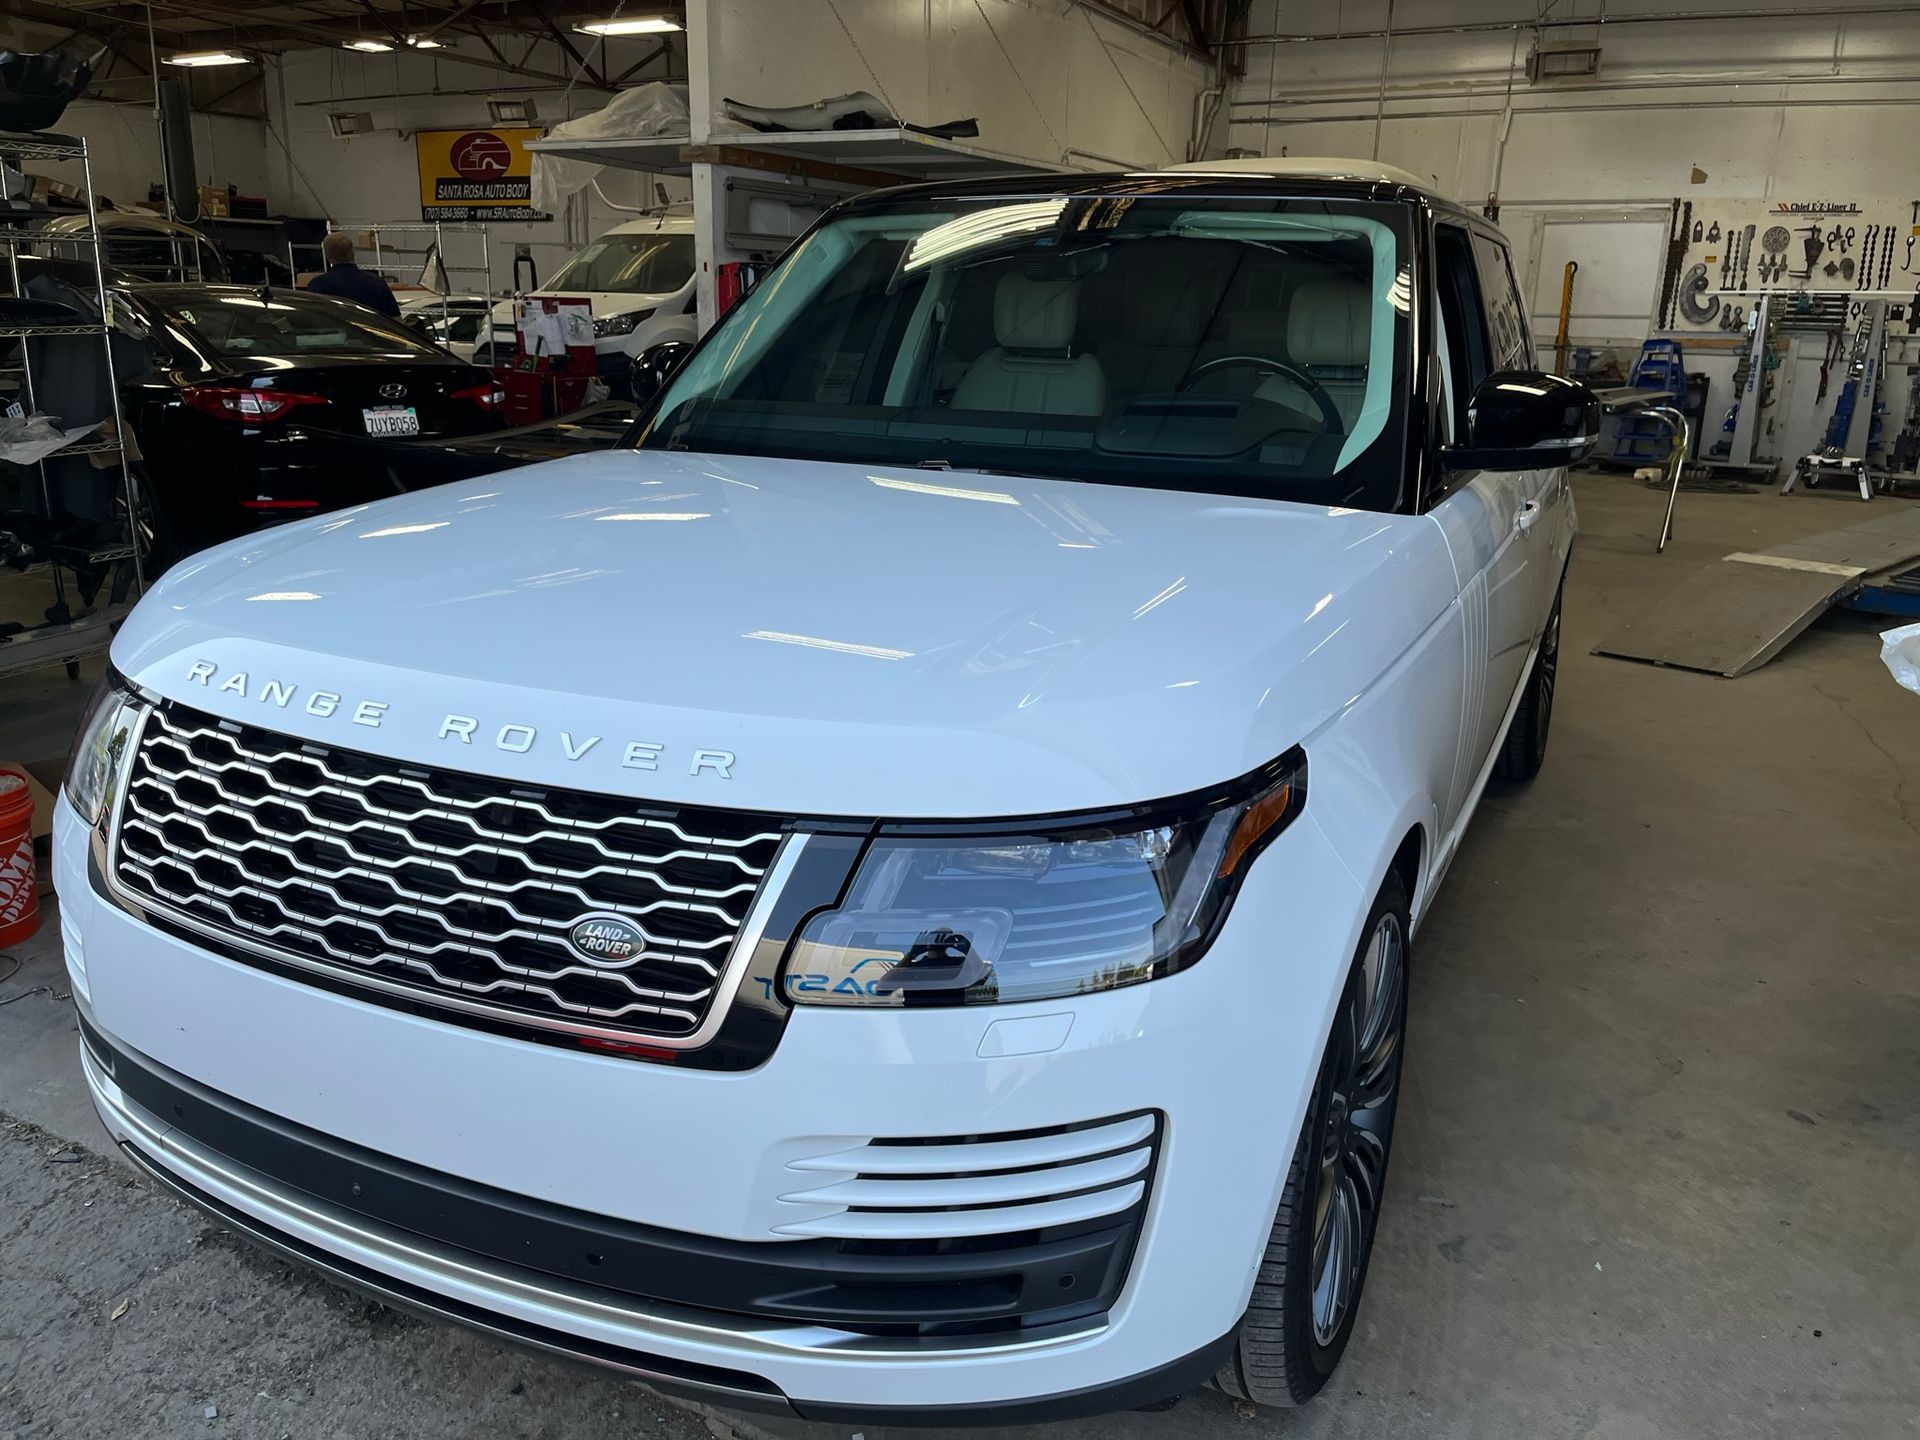 Windshield Replacement on a Range Rover Near Rohnert Park, CA